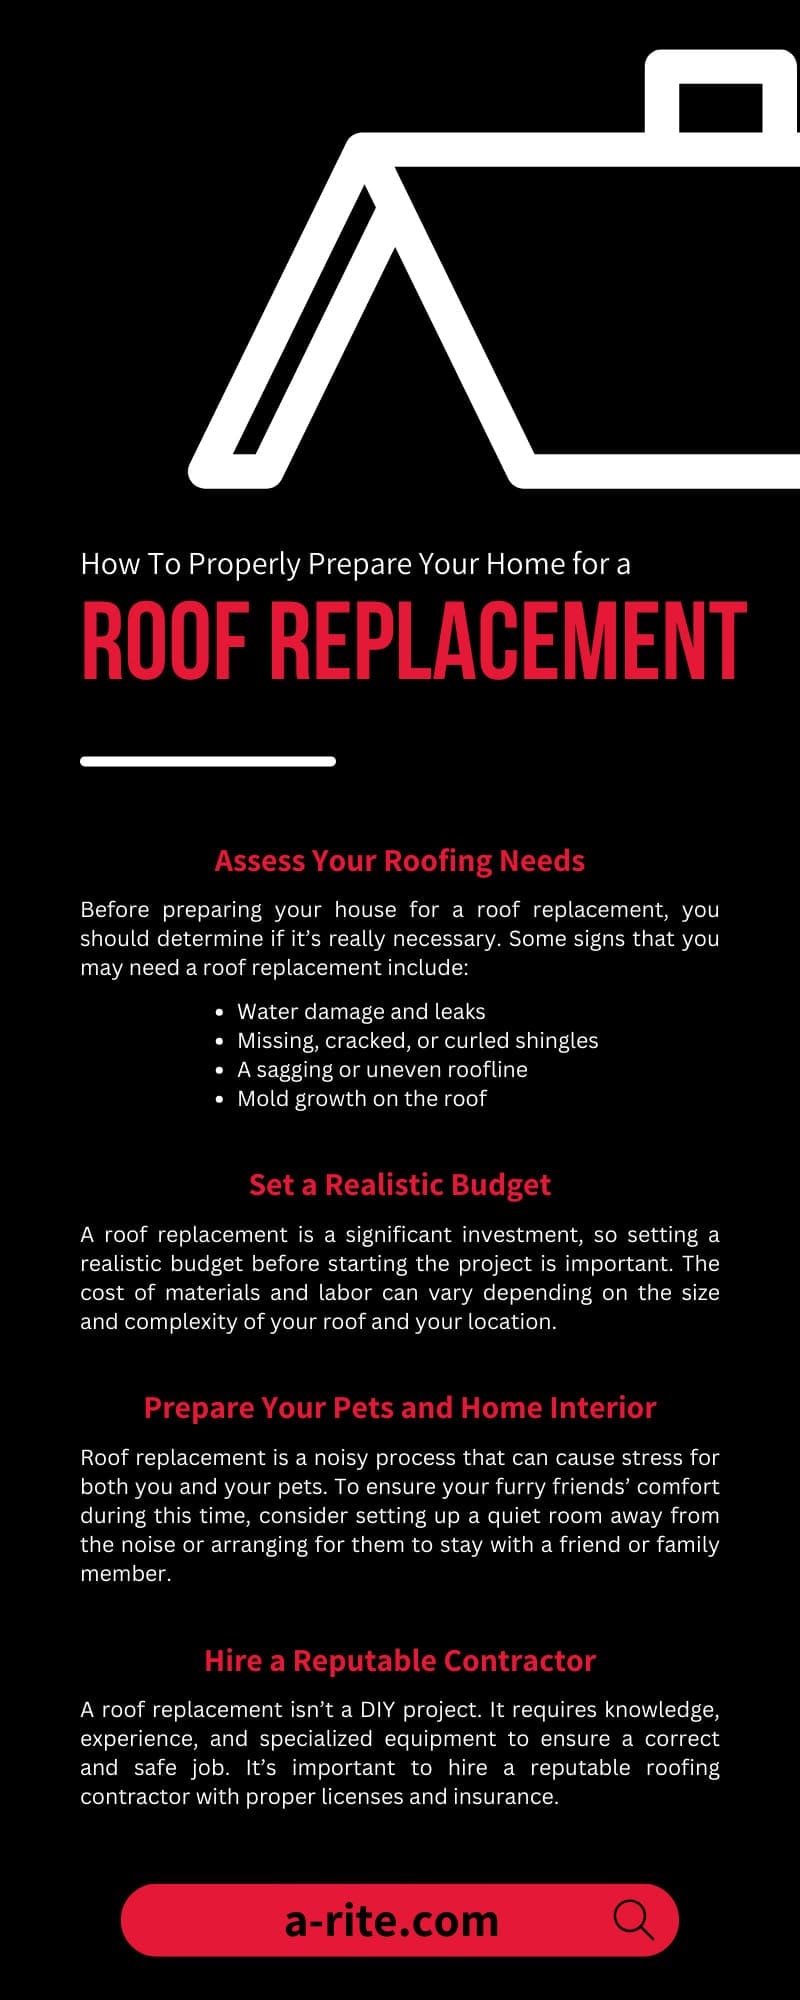 How To Properly Prepare Your Home for a Roof Replacement